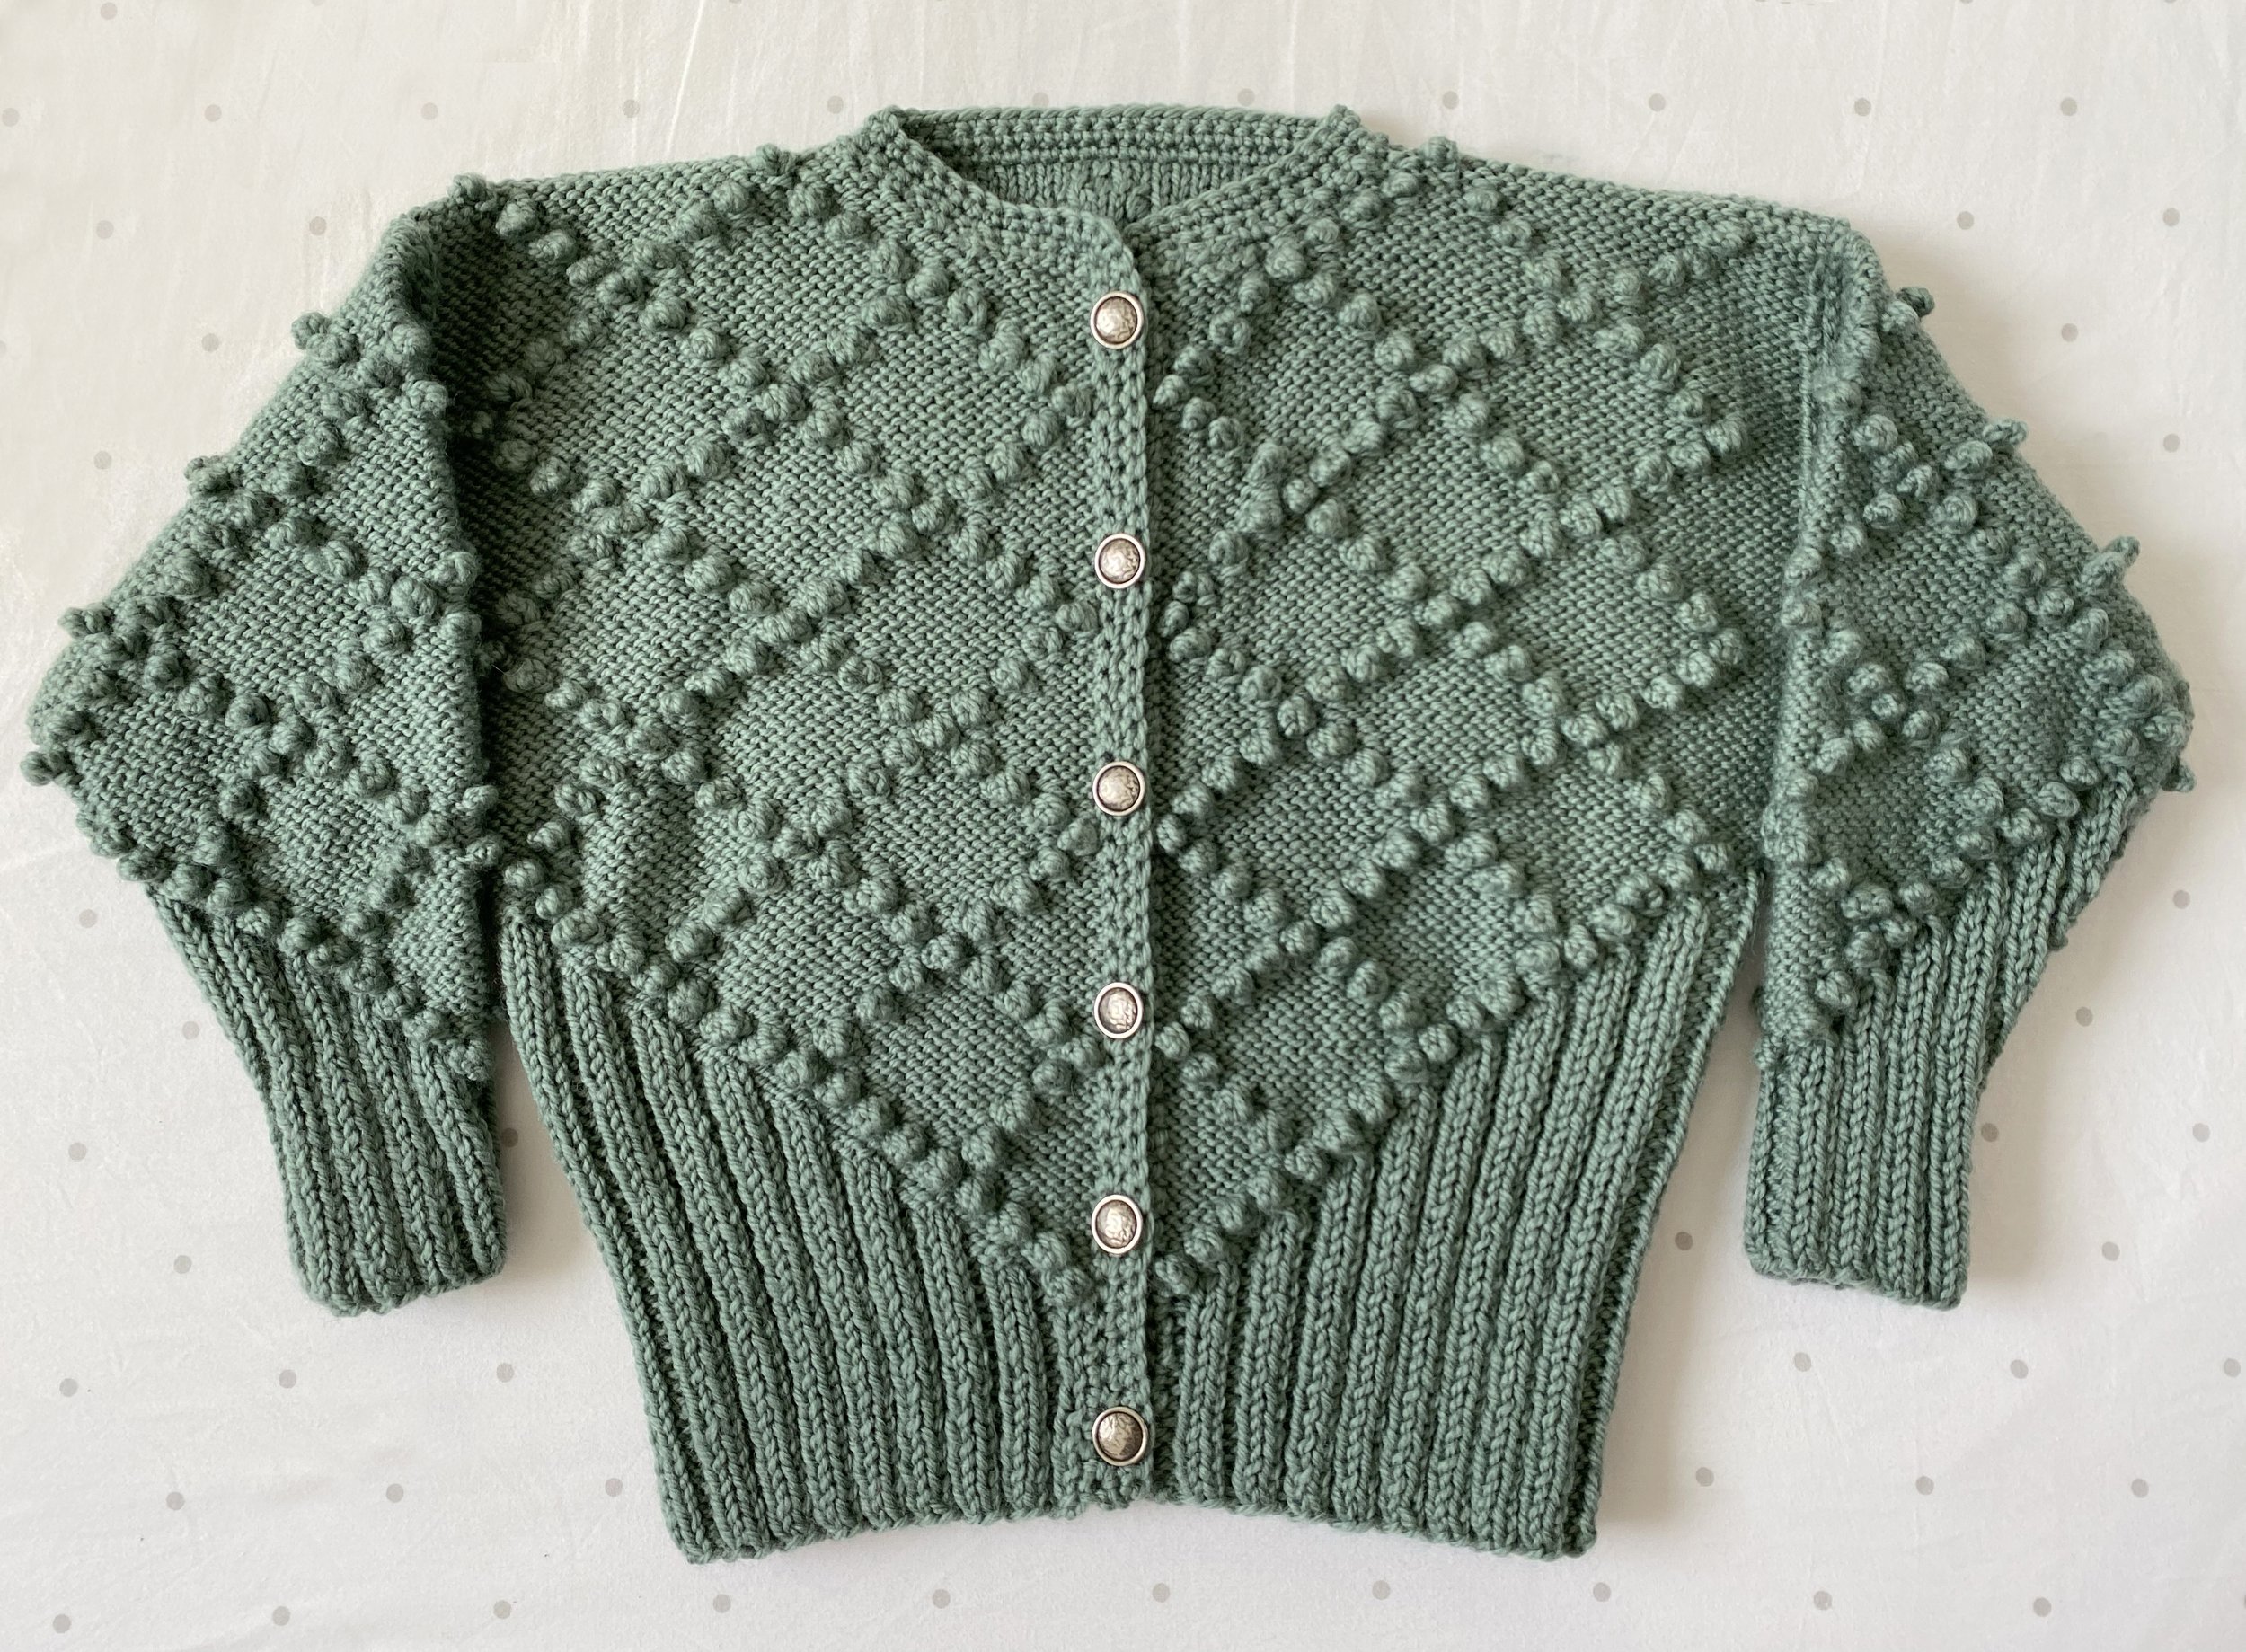  Bobble knit cardigan with crochet placket  